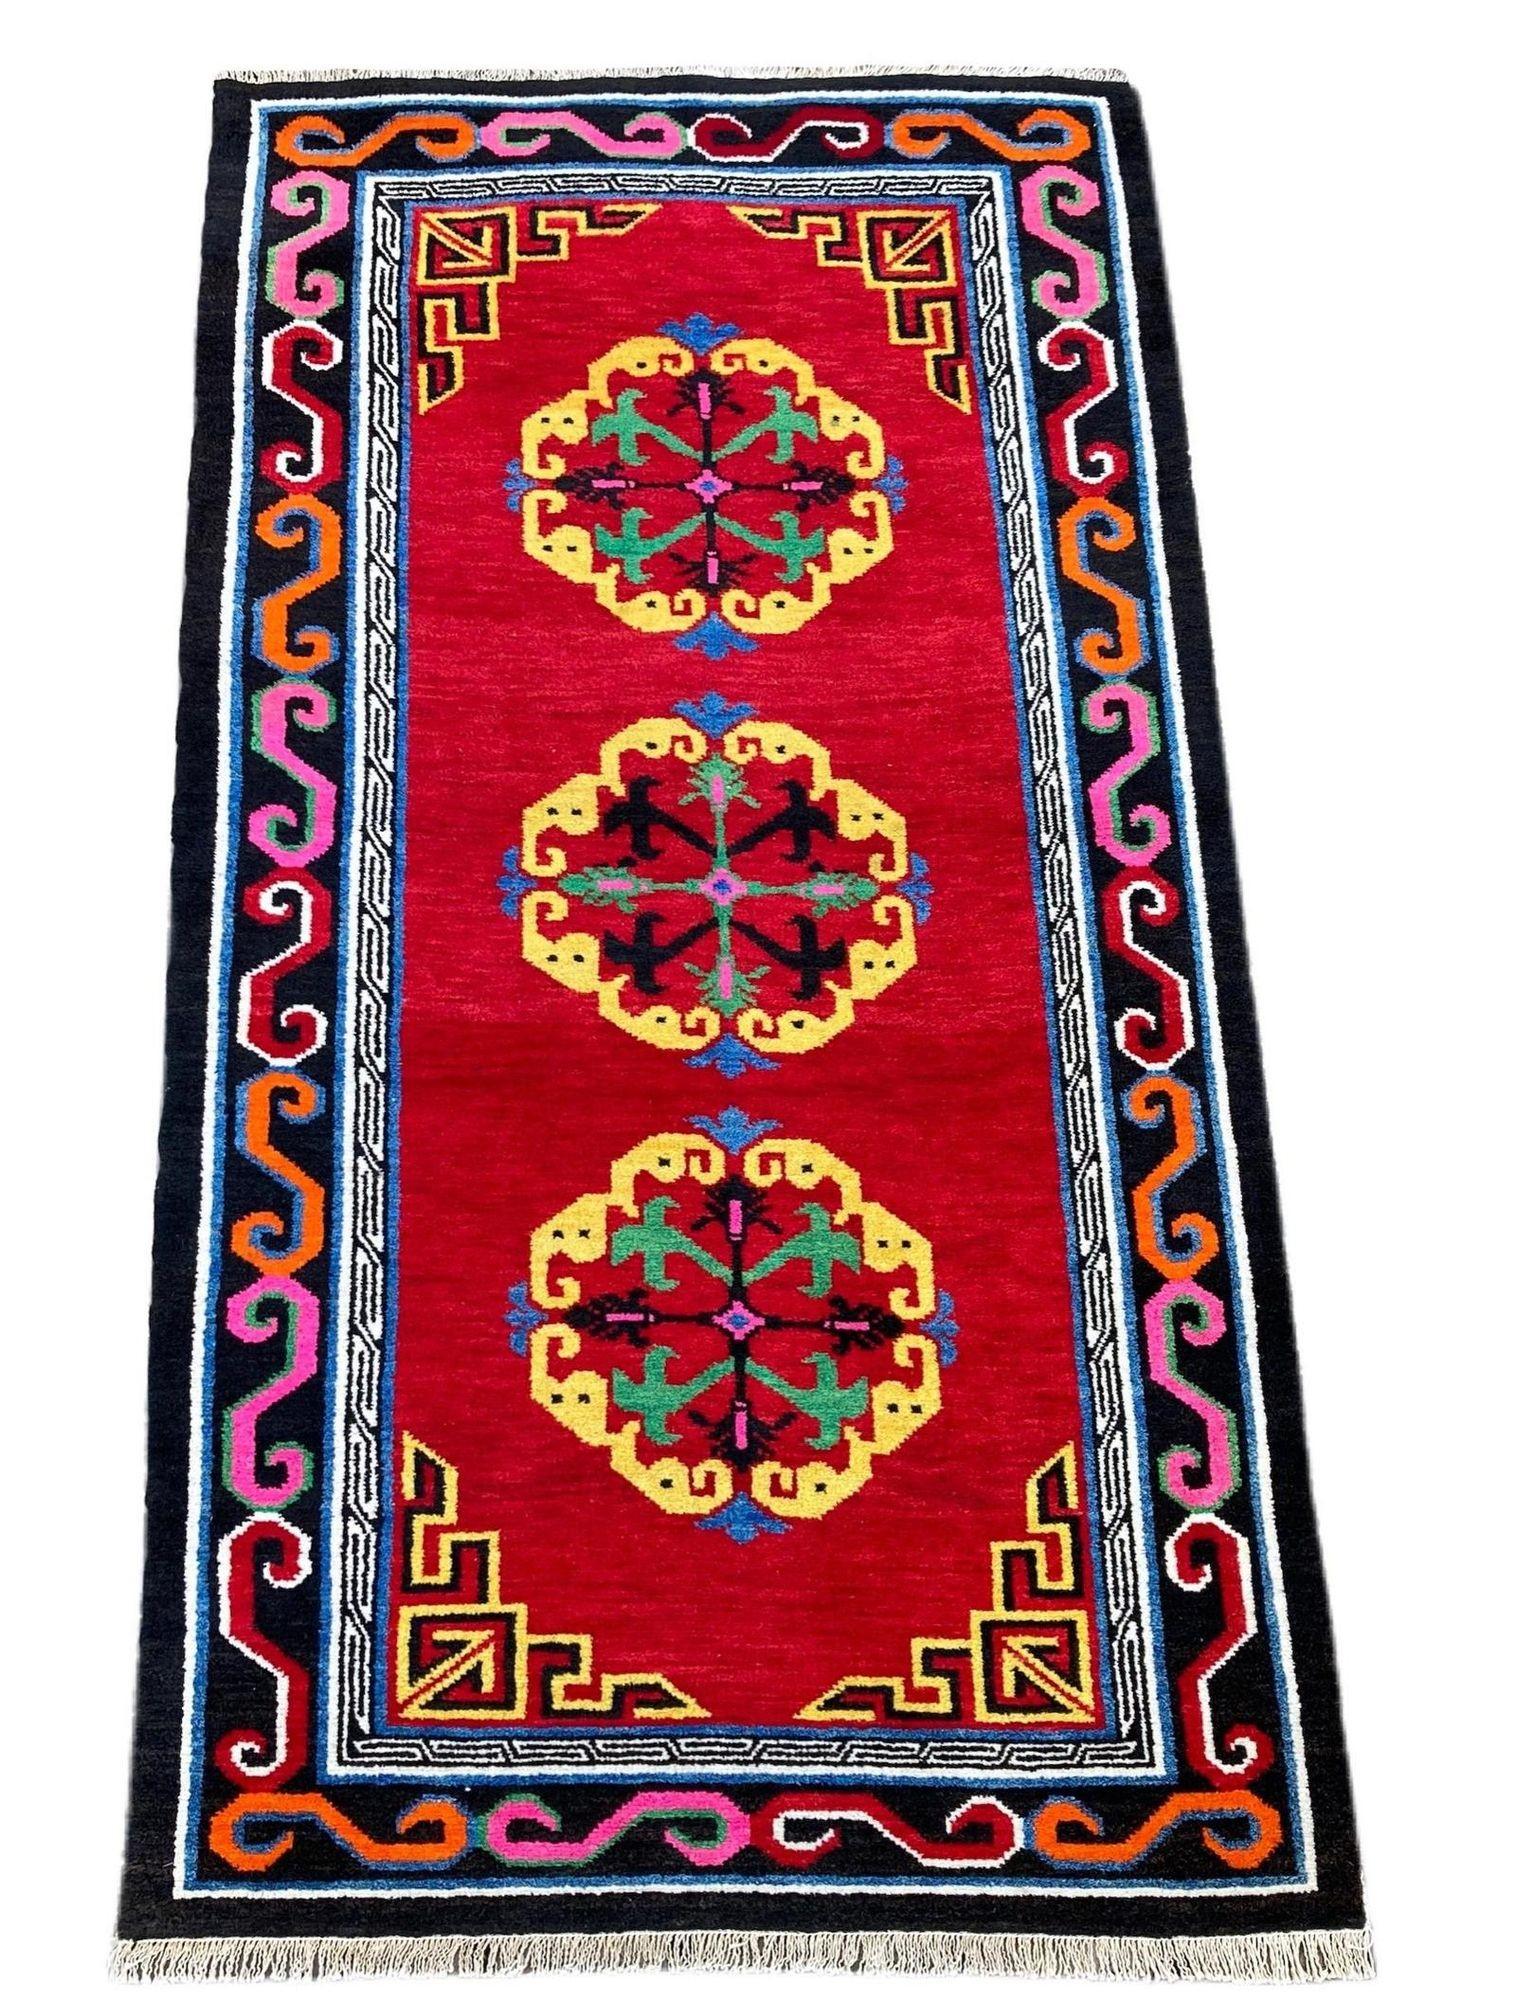 A bright and cheery antique Tibetan rug, handwoven circa 1920 with a three medallion design on a tomato red field. Lovely wool quality and rather funky secondary colours!
Size: 1.70m x 0..97m (5ft 7in x 3ft 2in)
This rug is in good condition with